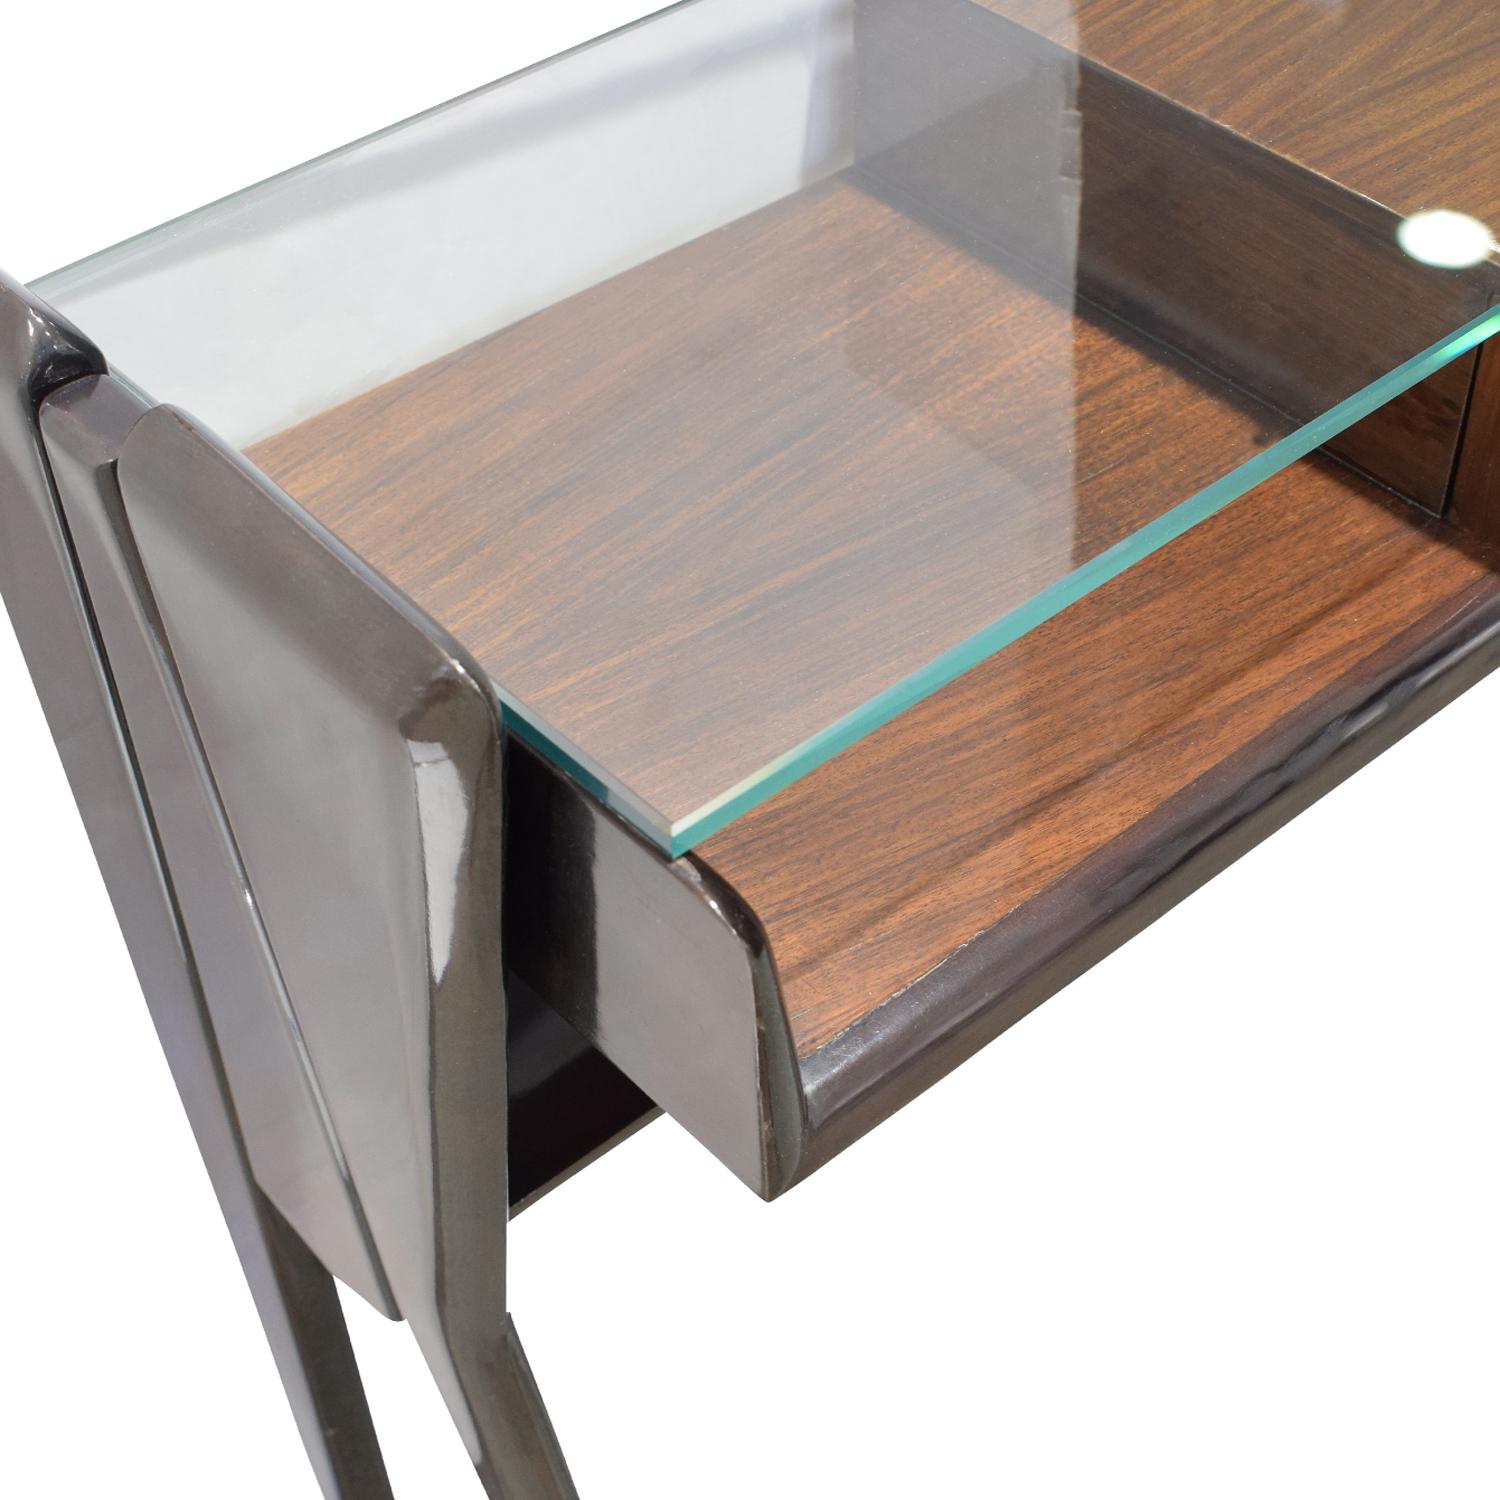 Italian Sculptural Console Table in Dark Walnut with Glass Top, 1950s